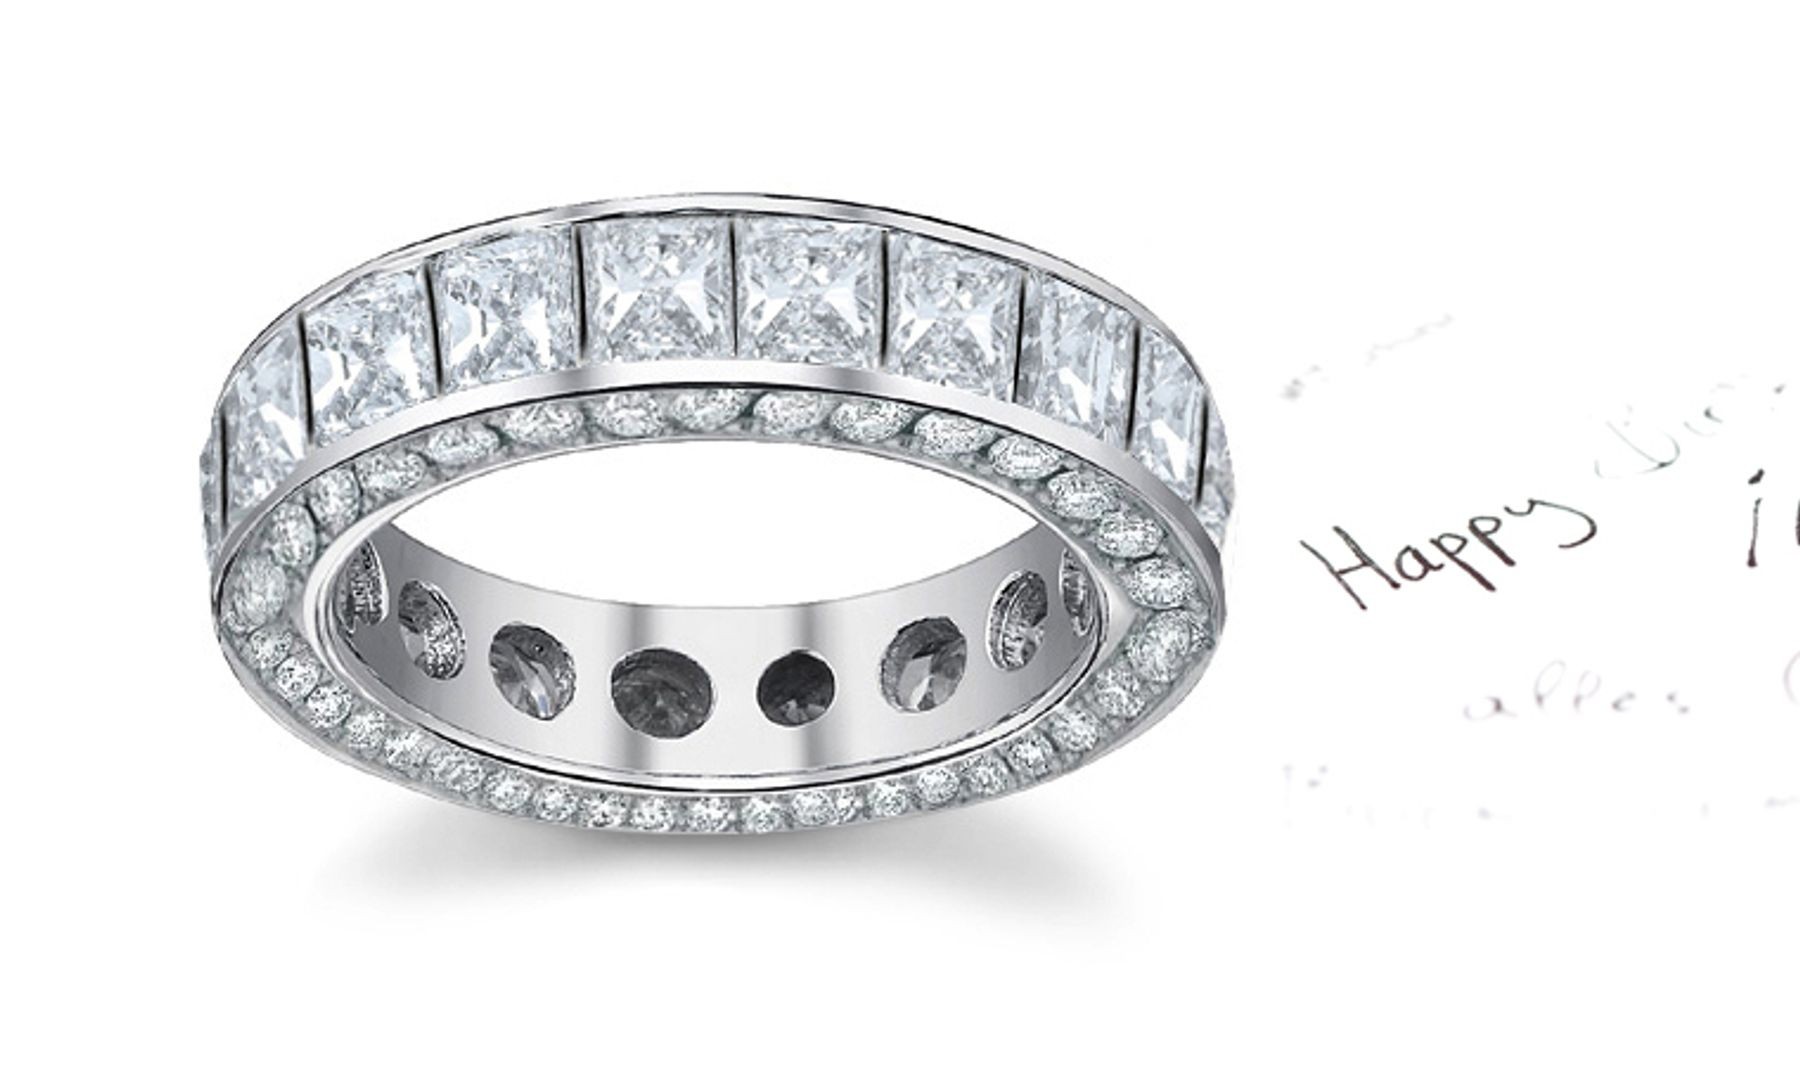 Twinkling Princess Cut Diamond Eternity Band with Sides Sprinled All Around on Either Sides in Platinum Three-Dimensional Realistic View